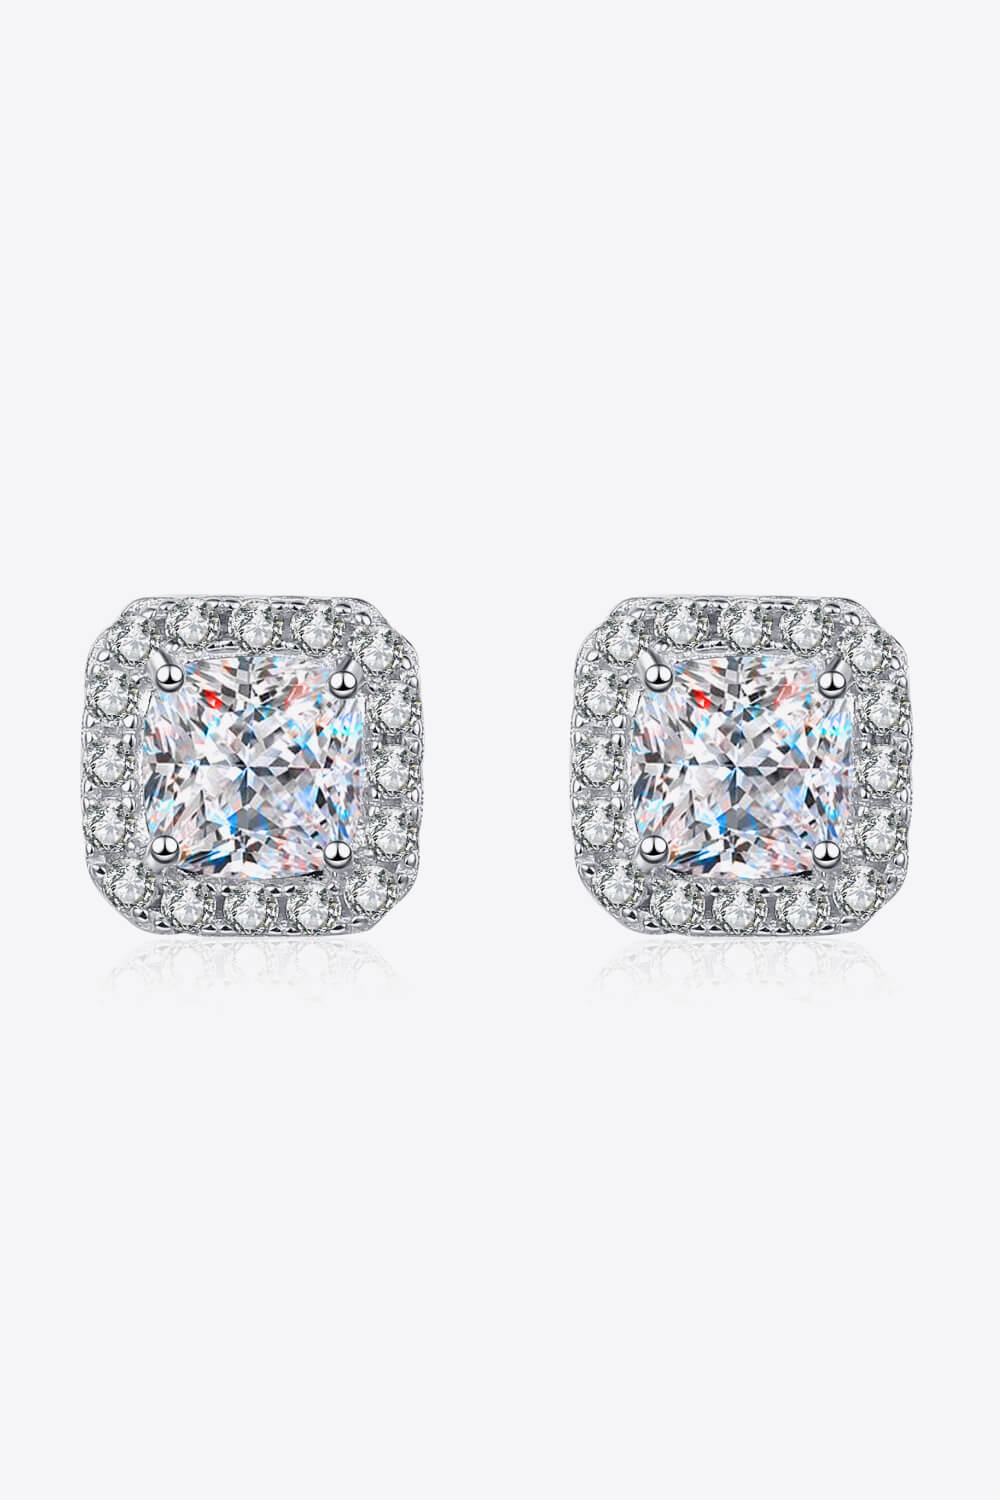 Women's 925 Sterling Silver Inlaid 2 Carat Moissanite Square Stud Earrings